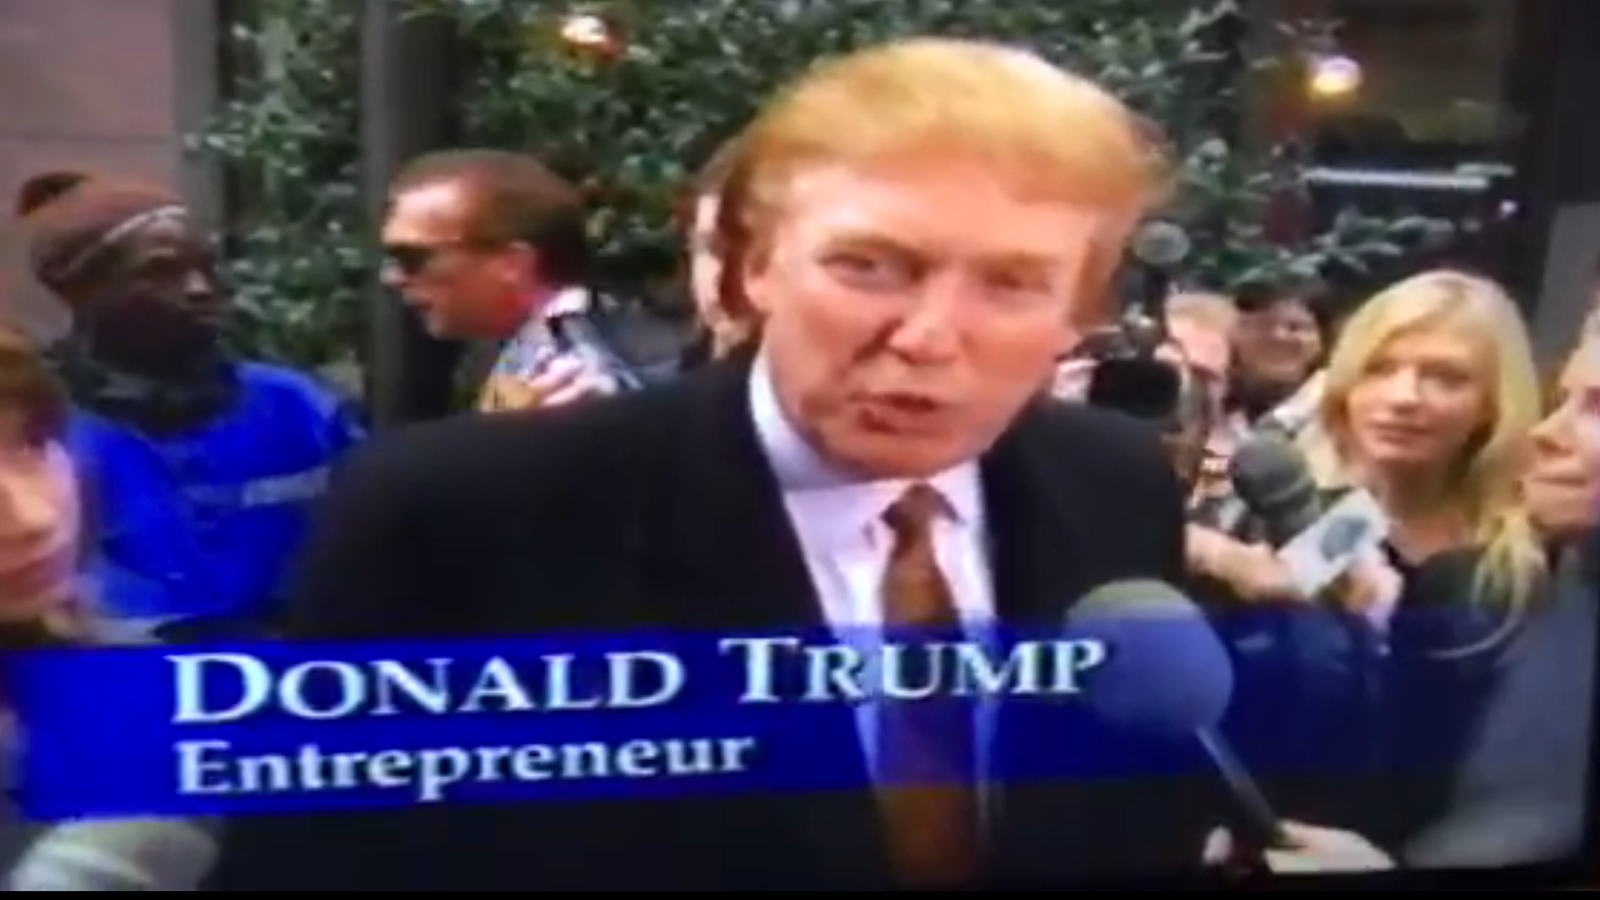 Tv Softcore Porn - Trump Appeared in a 2000 Softcore Porn Video Featuring Women ...